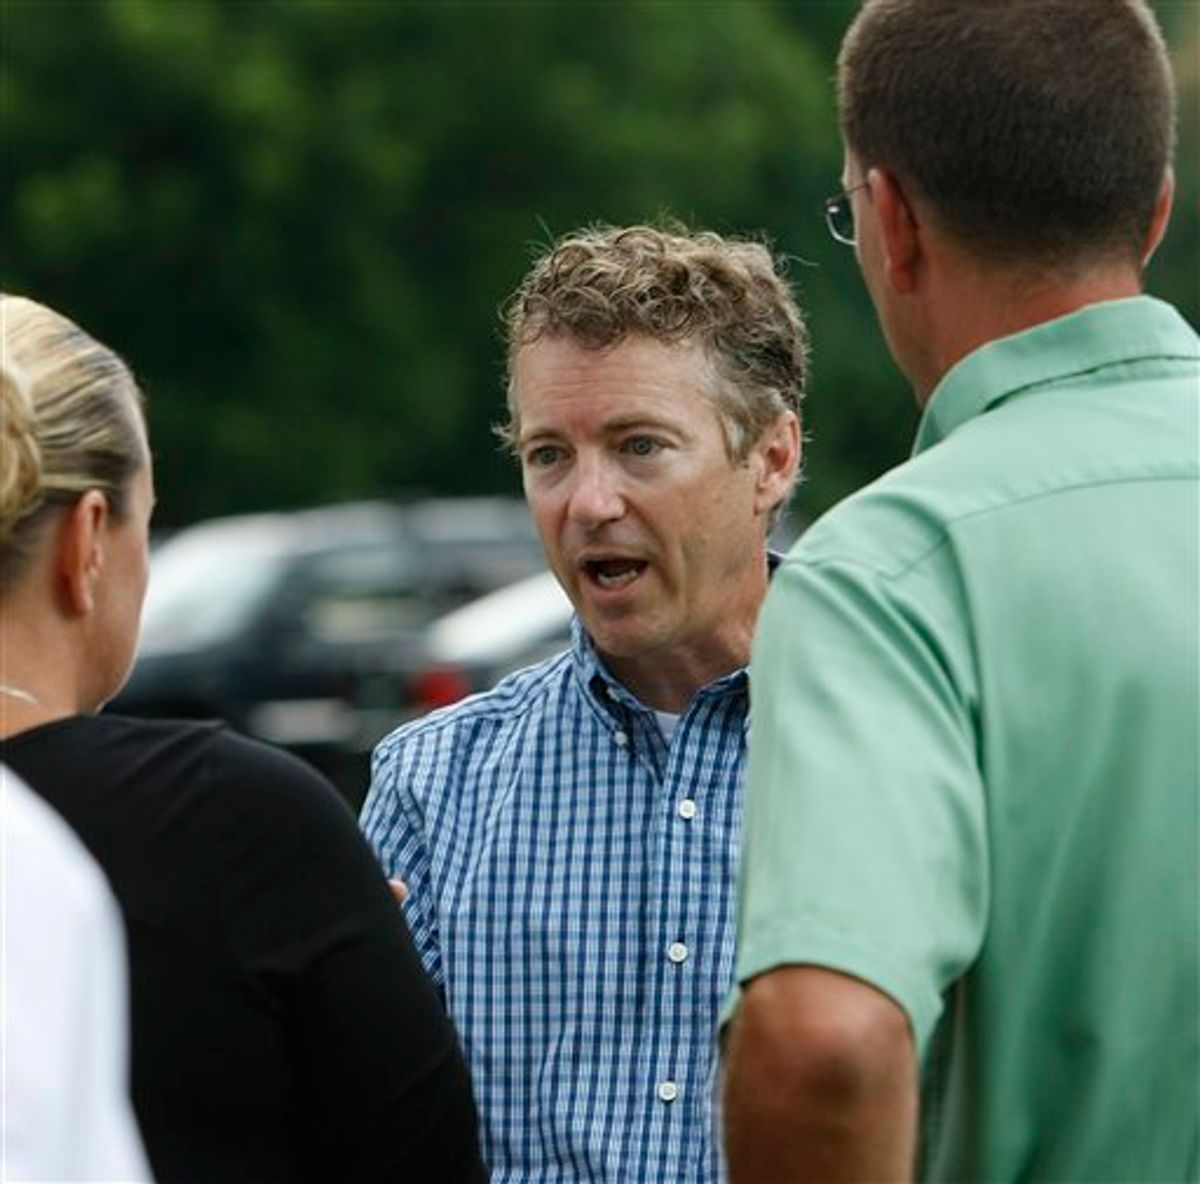 Republican U.S. Senate candidate Rand Paul talks with supporters during a campaign event in Lexington, Ky., Saturday, July 17, 2010.  (AP Photo/Ed Reinke) (AP)